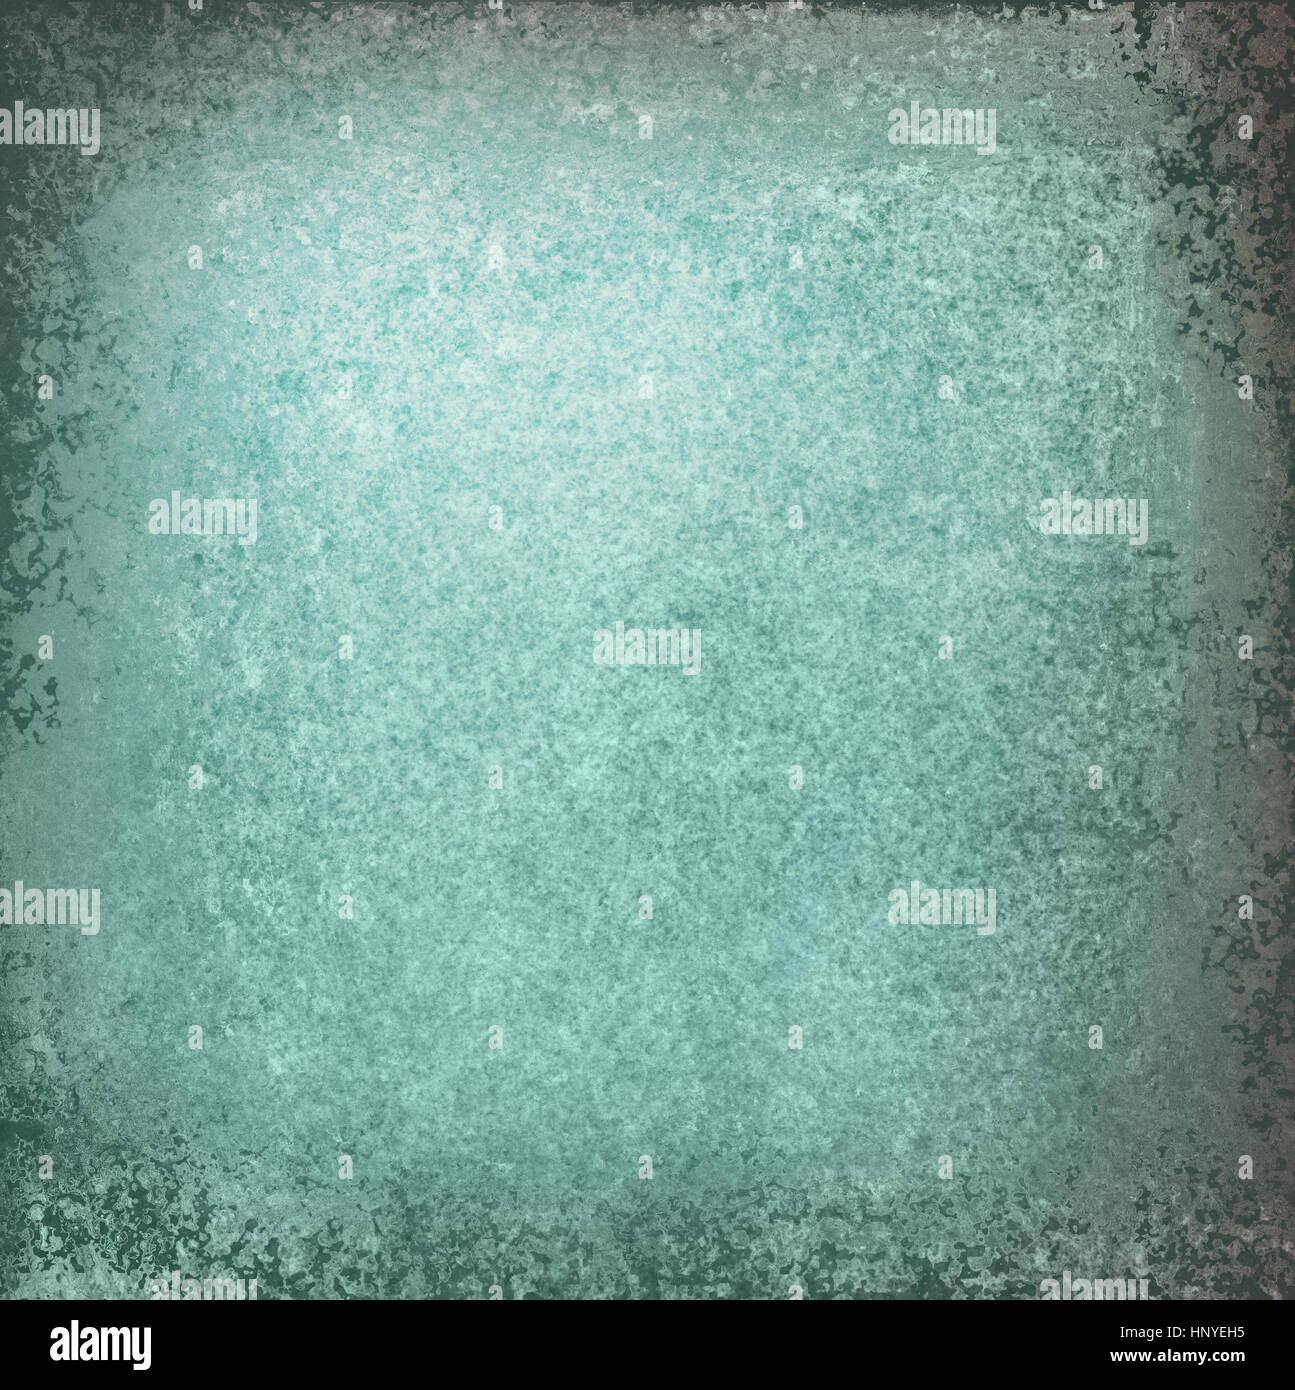 teal blue and white background with vintage grunge texture Stock Photo